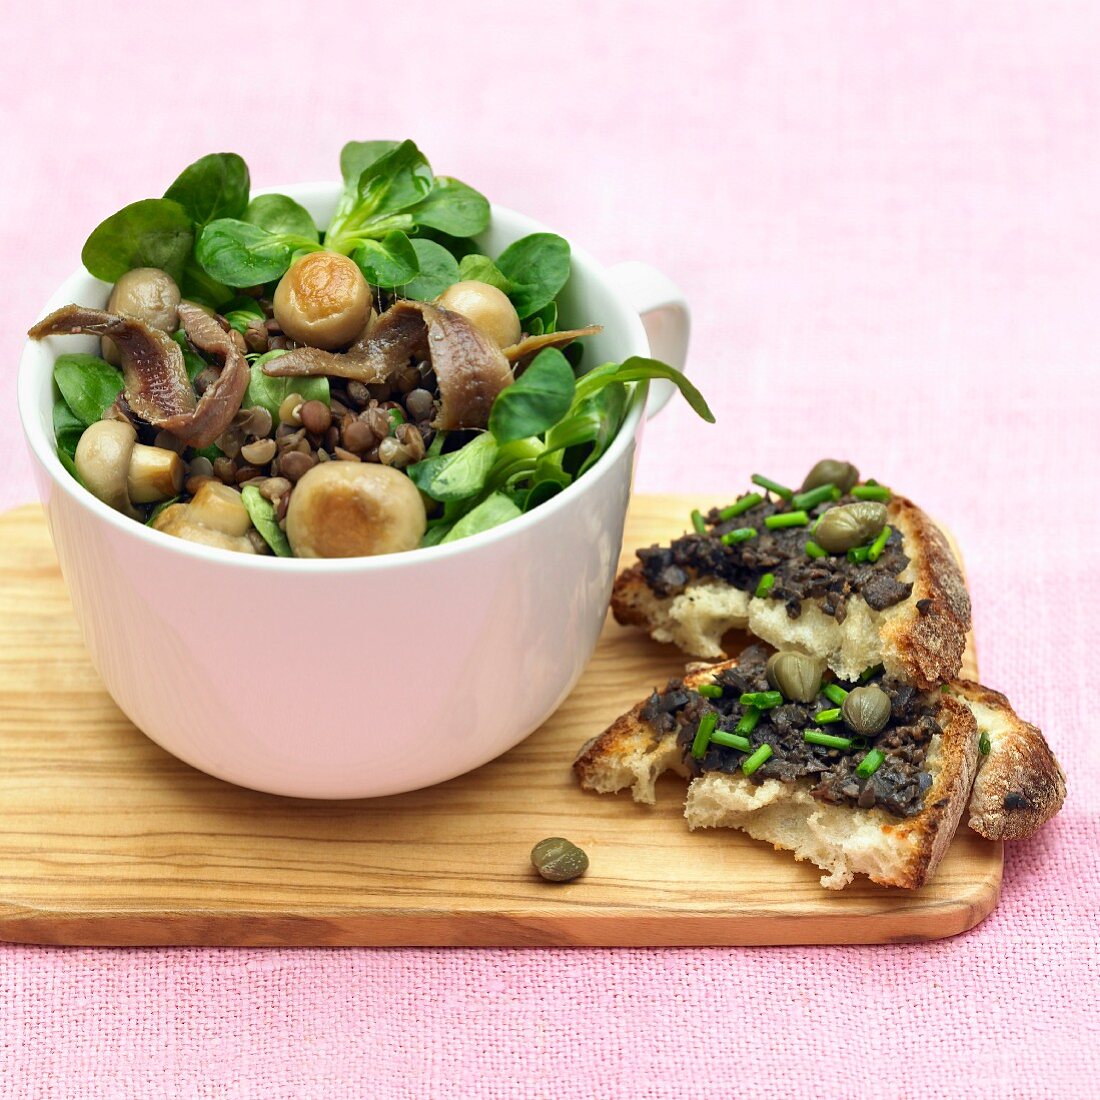 Lentil salad with mushrooms and lamb's lettuce